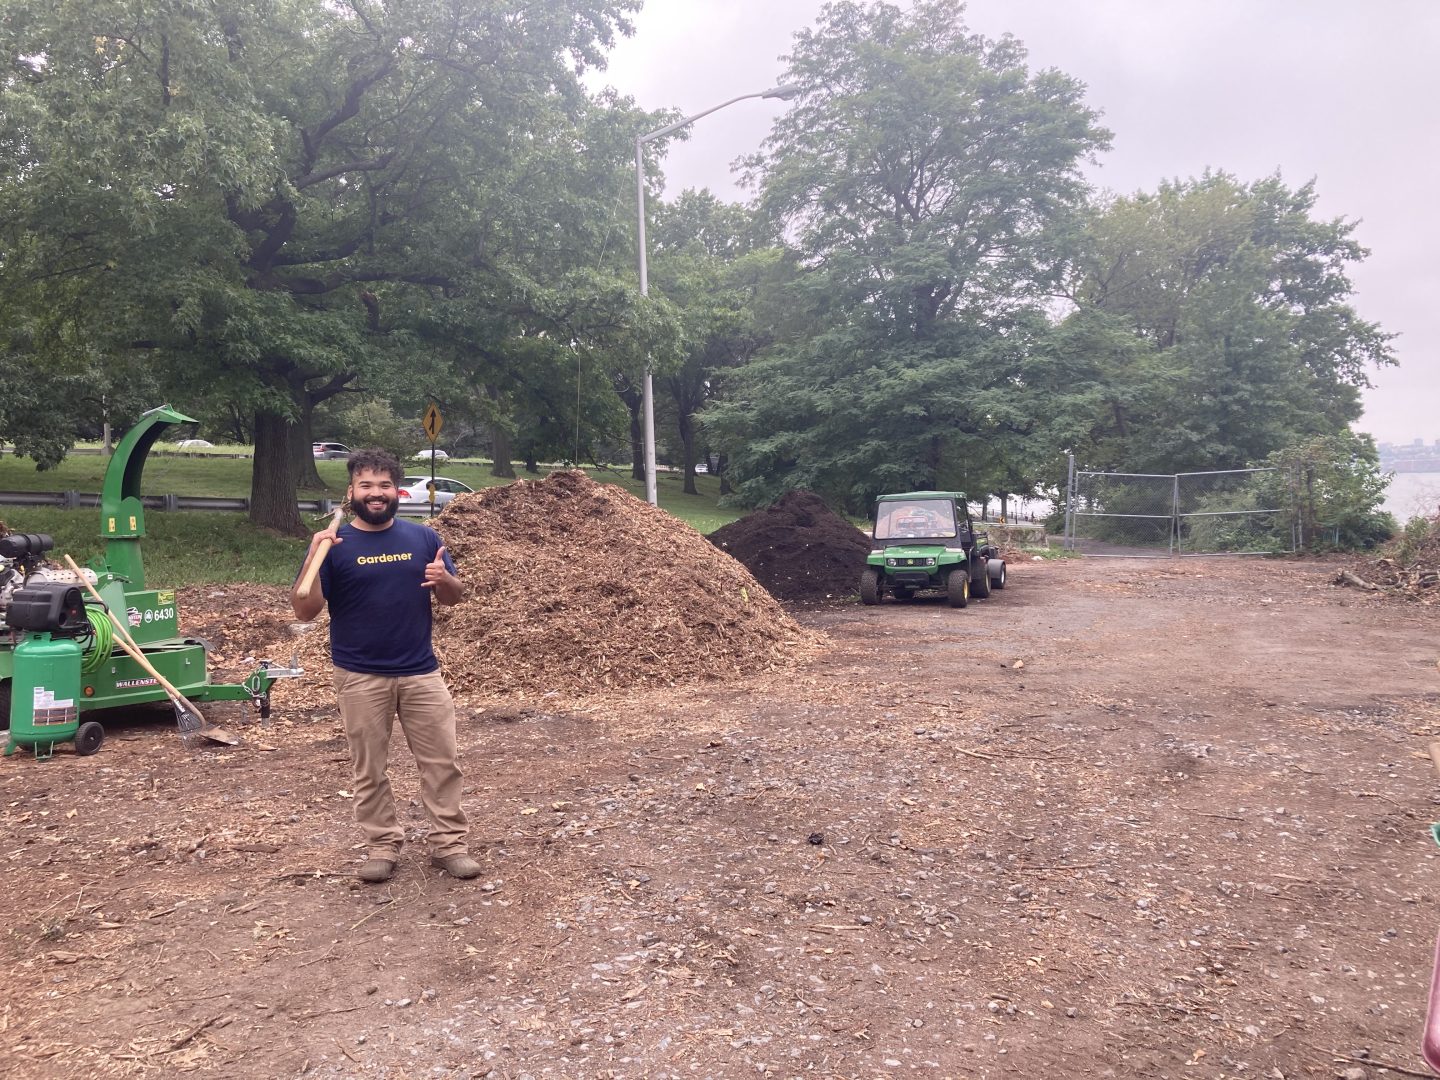 Staff member gives a thumbs up at the compost site